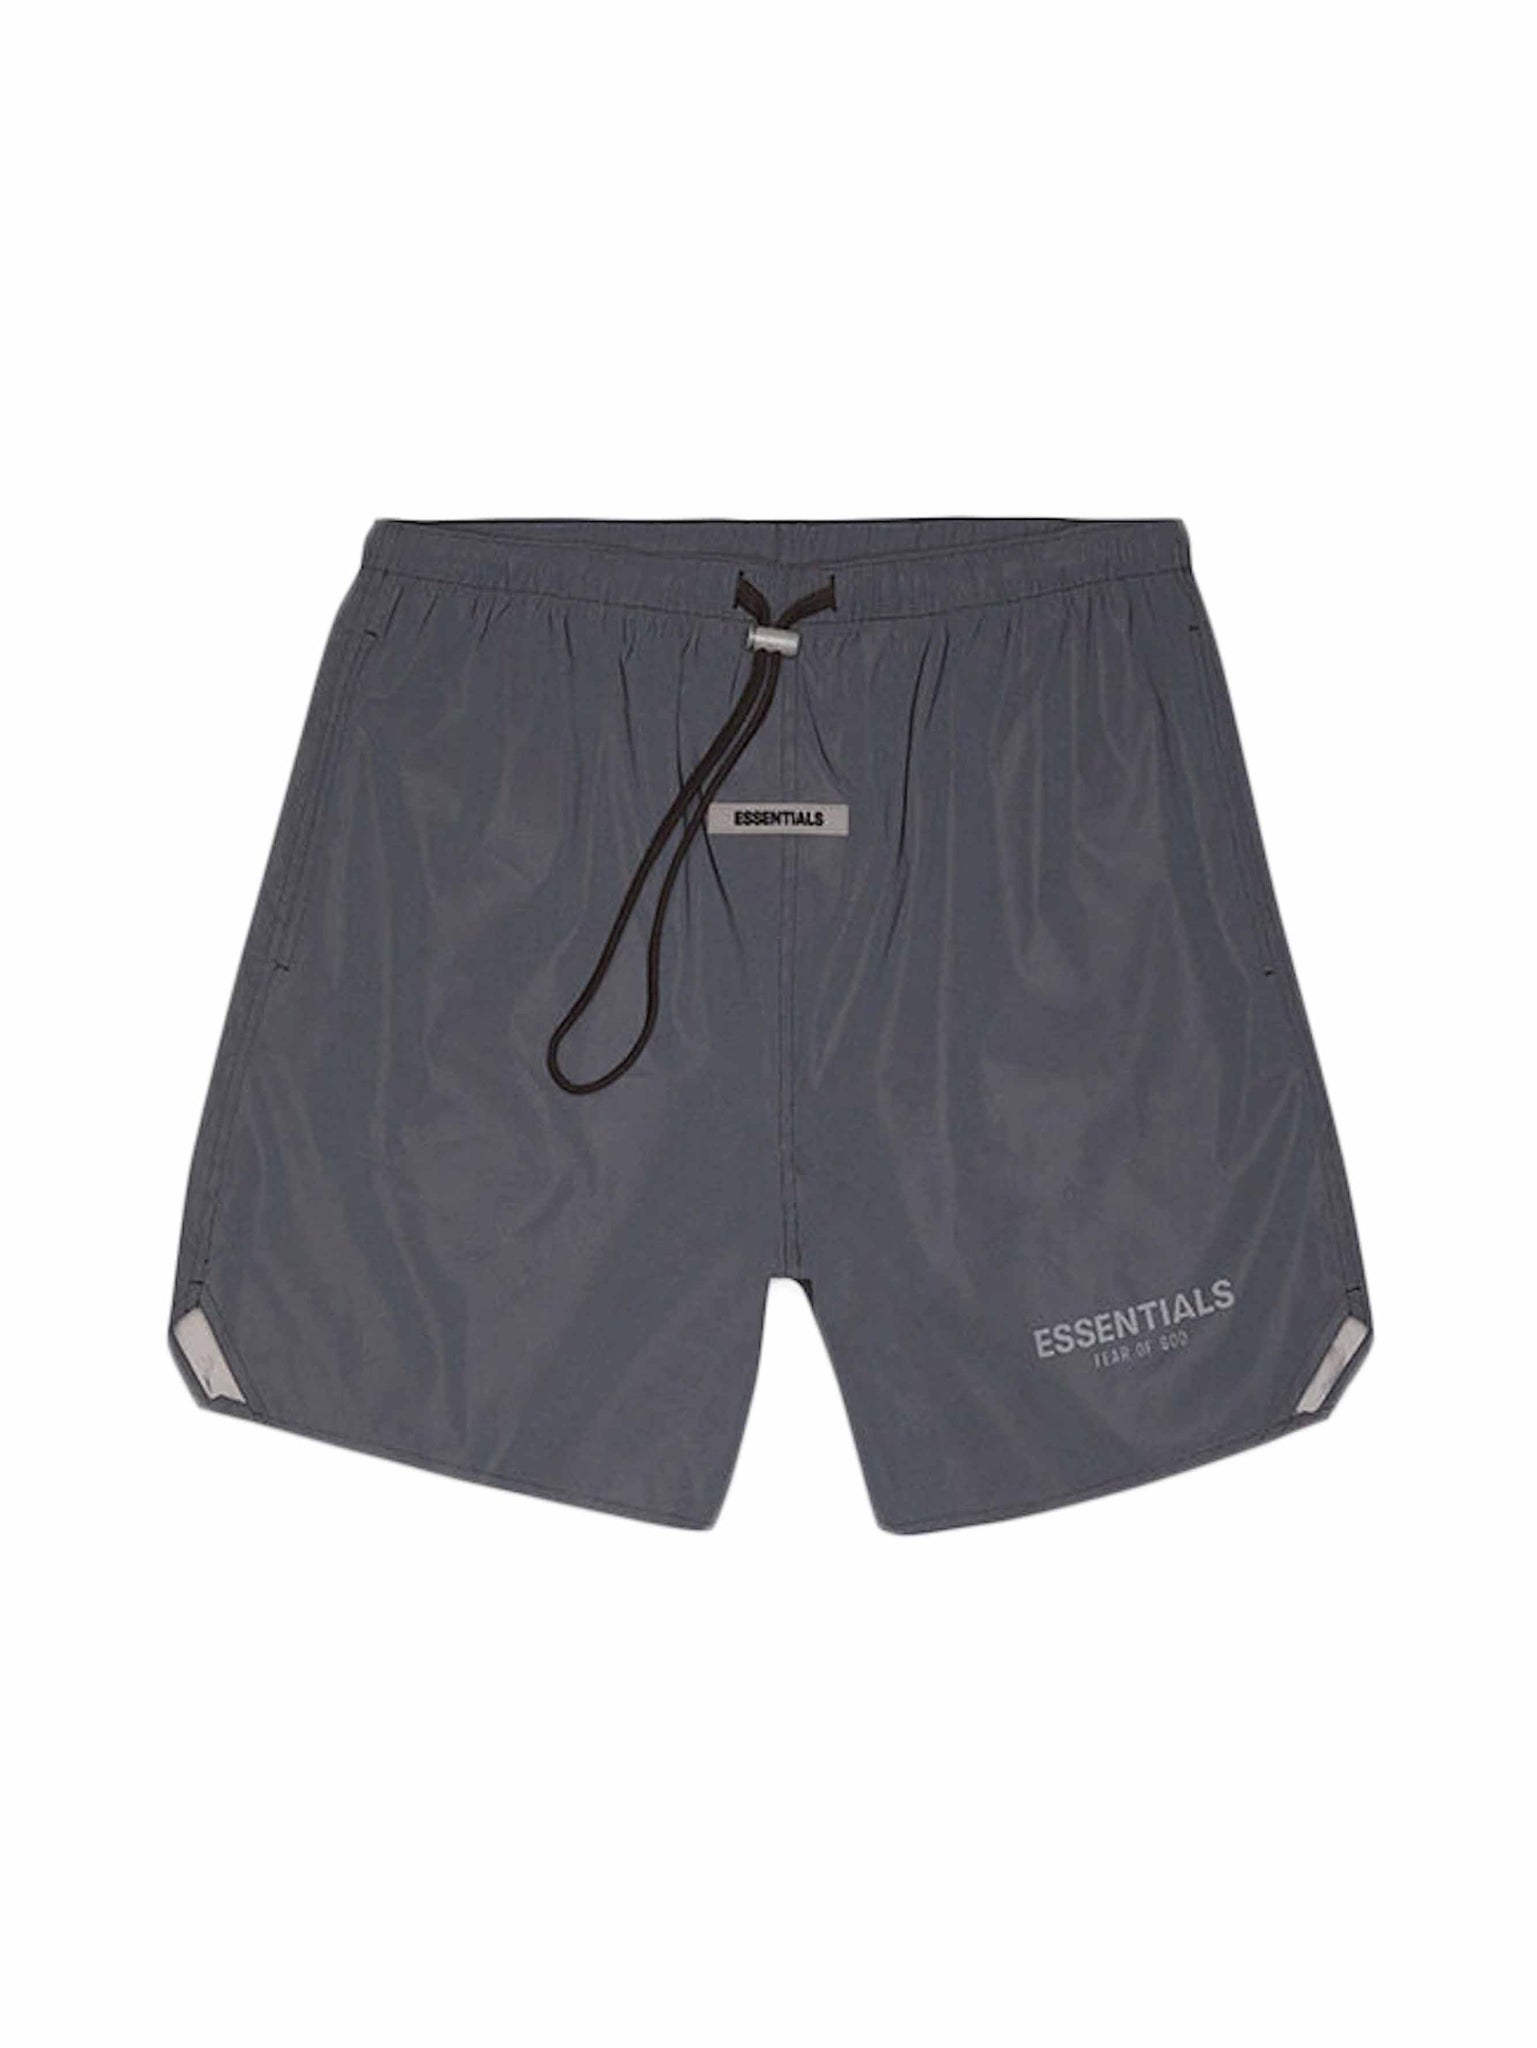 Fear of God Essentials Volley Shorts Black Reflective - Prior